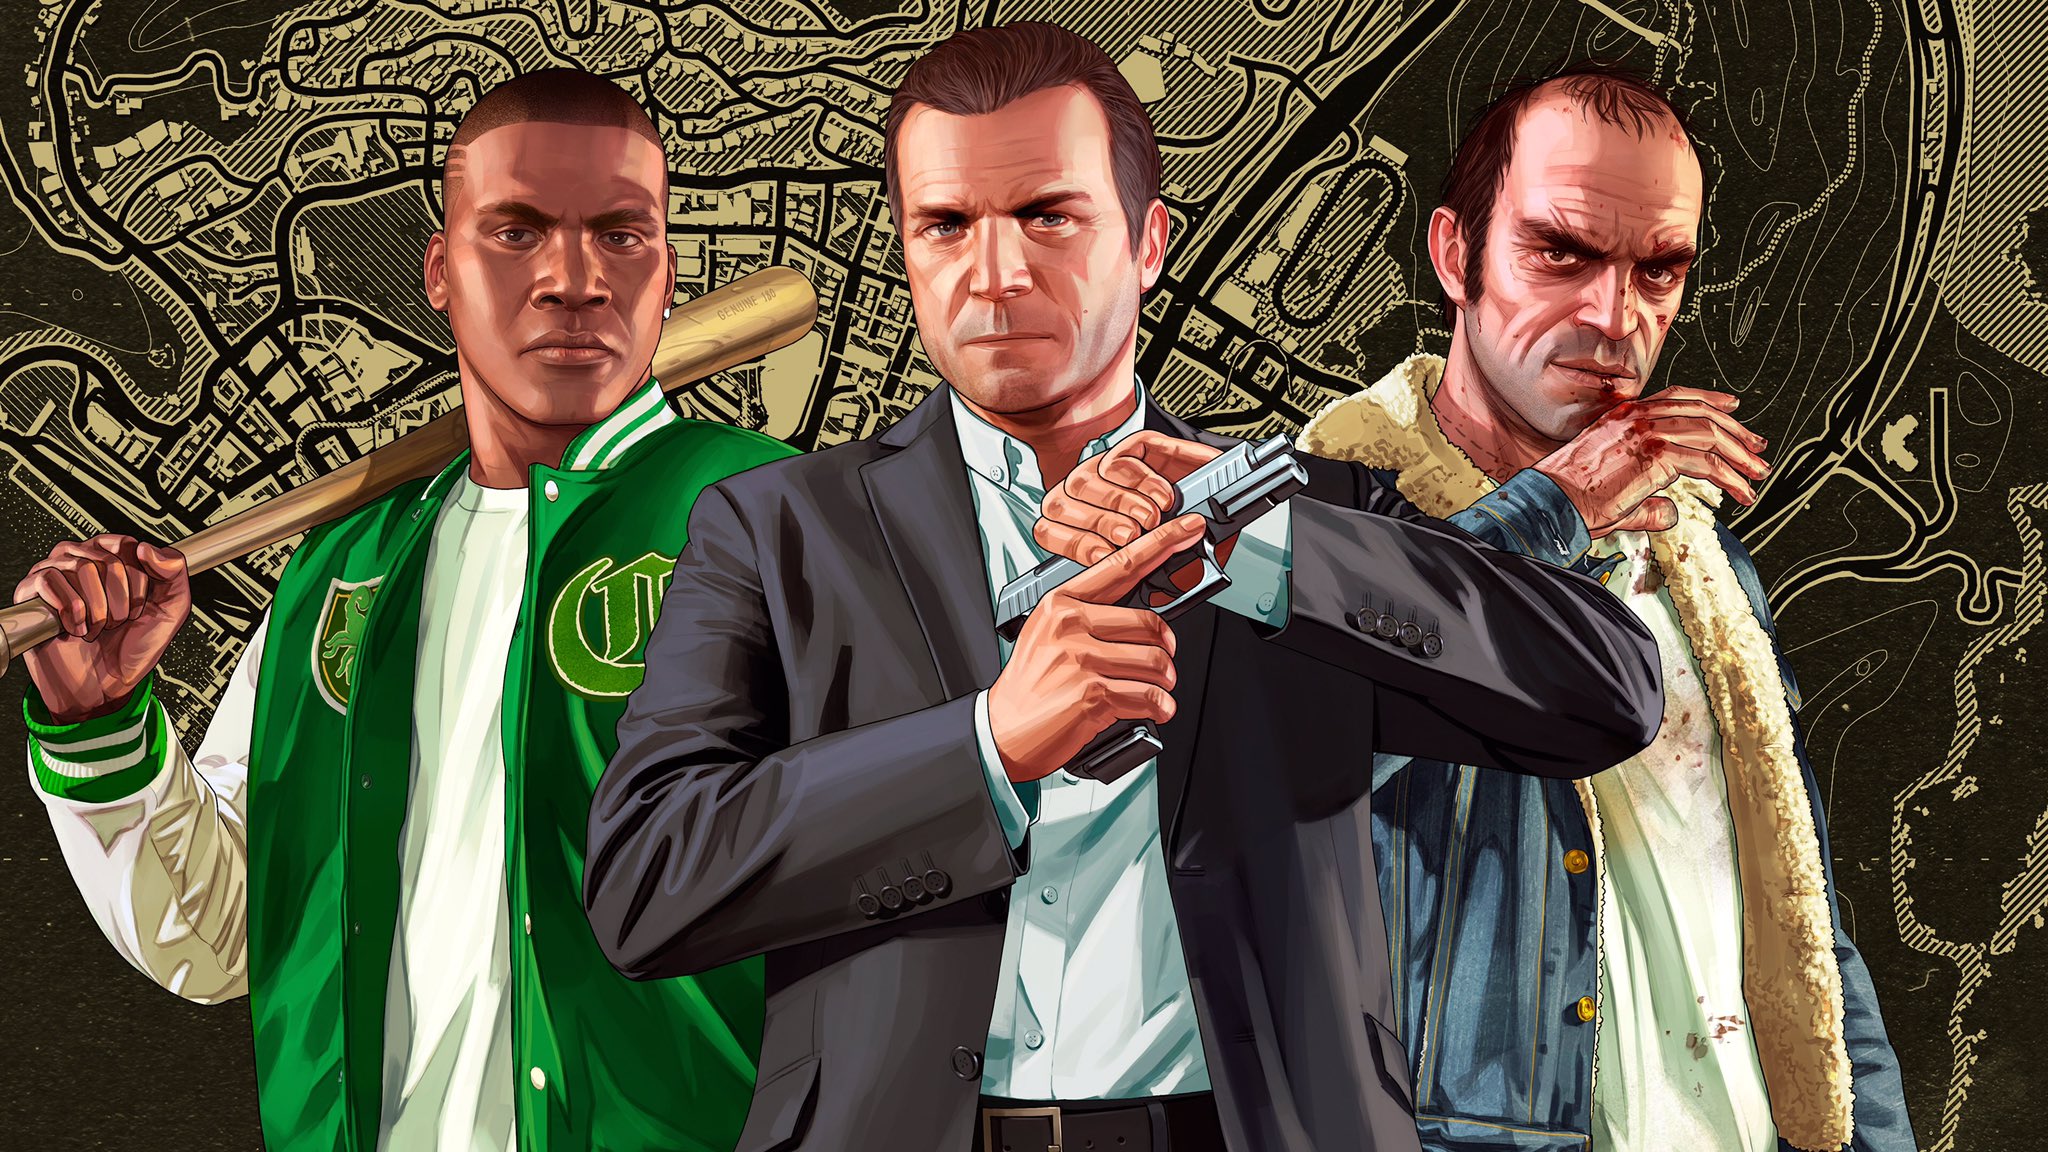 Next Gen GTA V pre-orders and pre-load go live on PS5, Xbox Series X